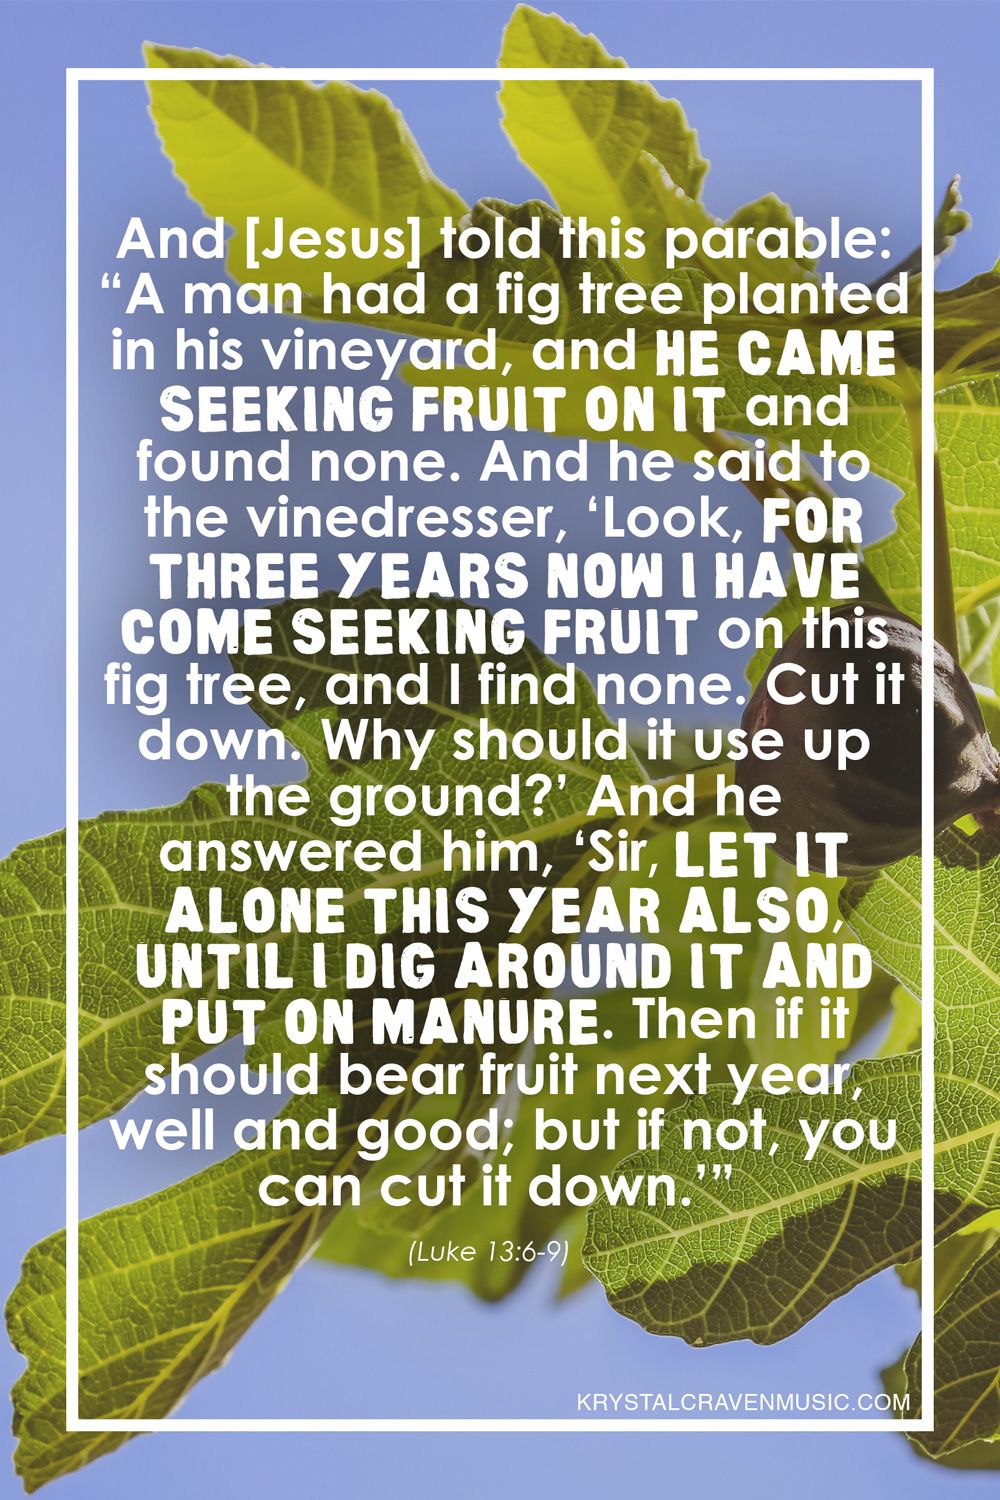 The text from Luke 13:6-9 that says "And [Jesus] told this parable: “A man had a fig tree planted in his vineyard, and he came seeking fruit on it and found none. And he said to the vinedresser, ‘Look, for three years now I have come seeking fruit on this fig tree, and I find none. Cut it down. Why should it use up the ground?’ And he answered him, ‘Sir, let it alone this year also, until I dig around it and put on manure. Then if it should bear fruit next year, well and good; but if not, you can cut it down.’”" over a fig tree with a single fig growing on it.